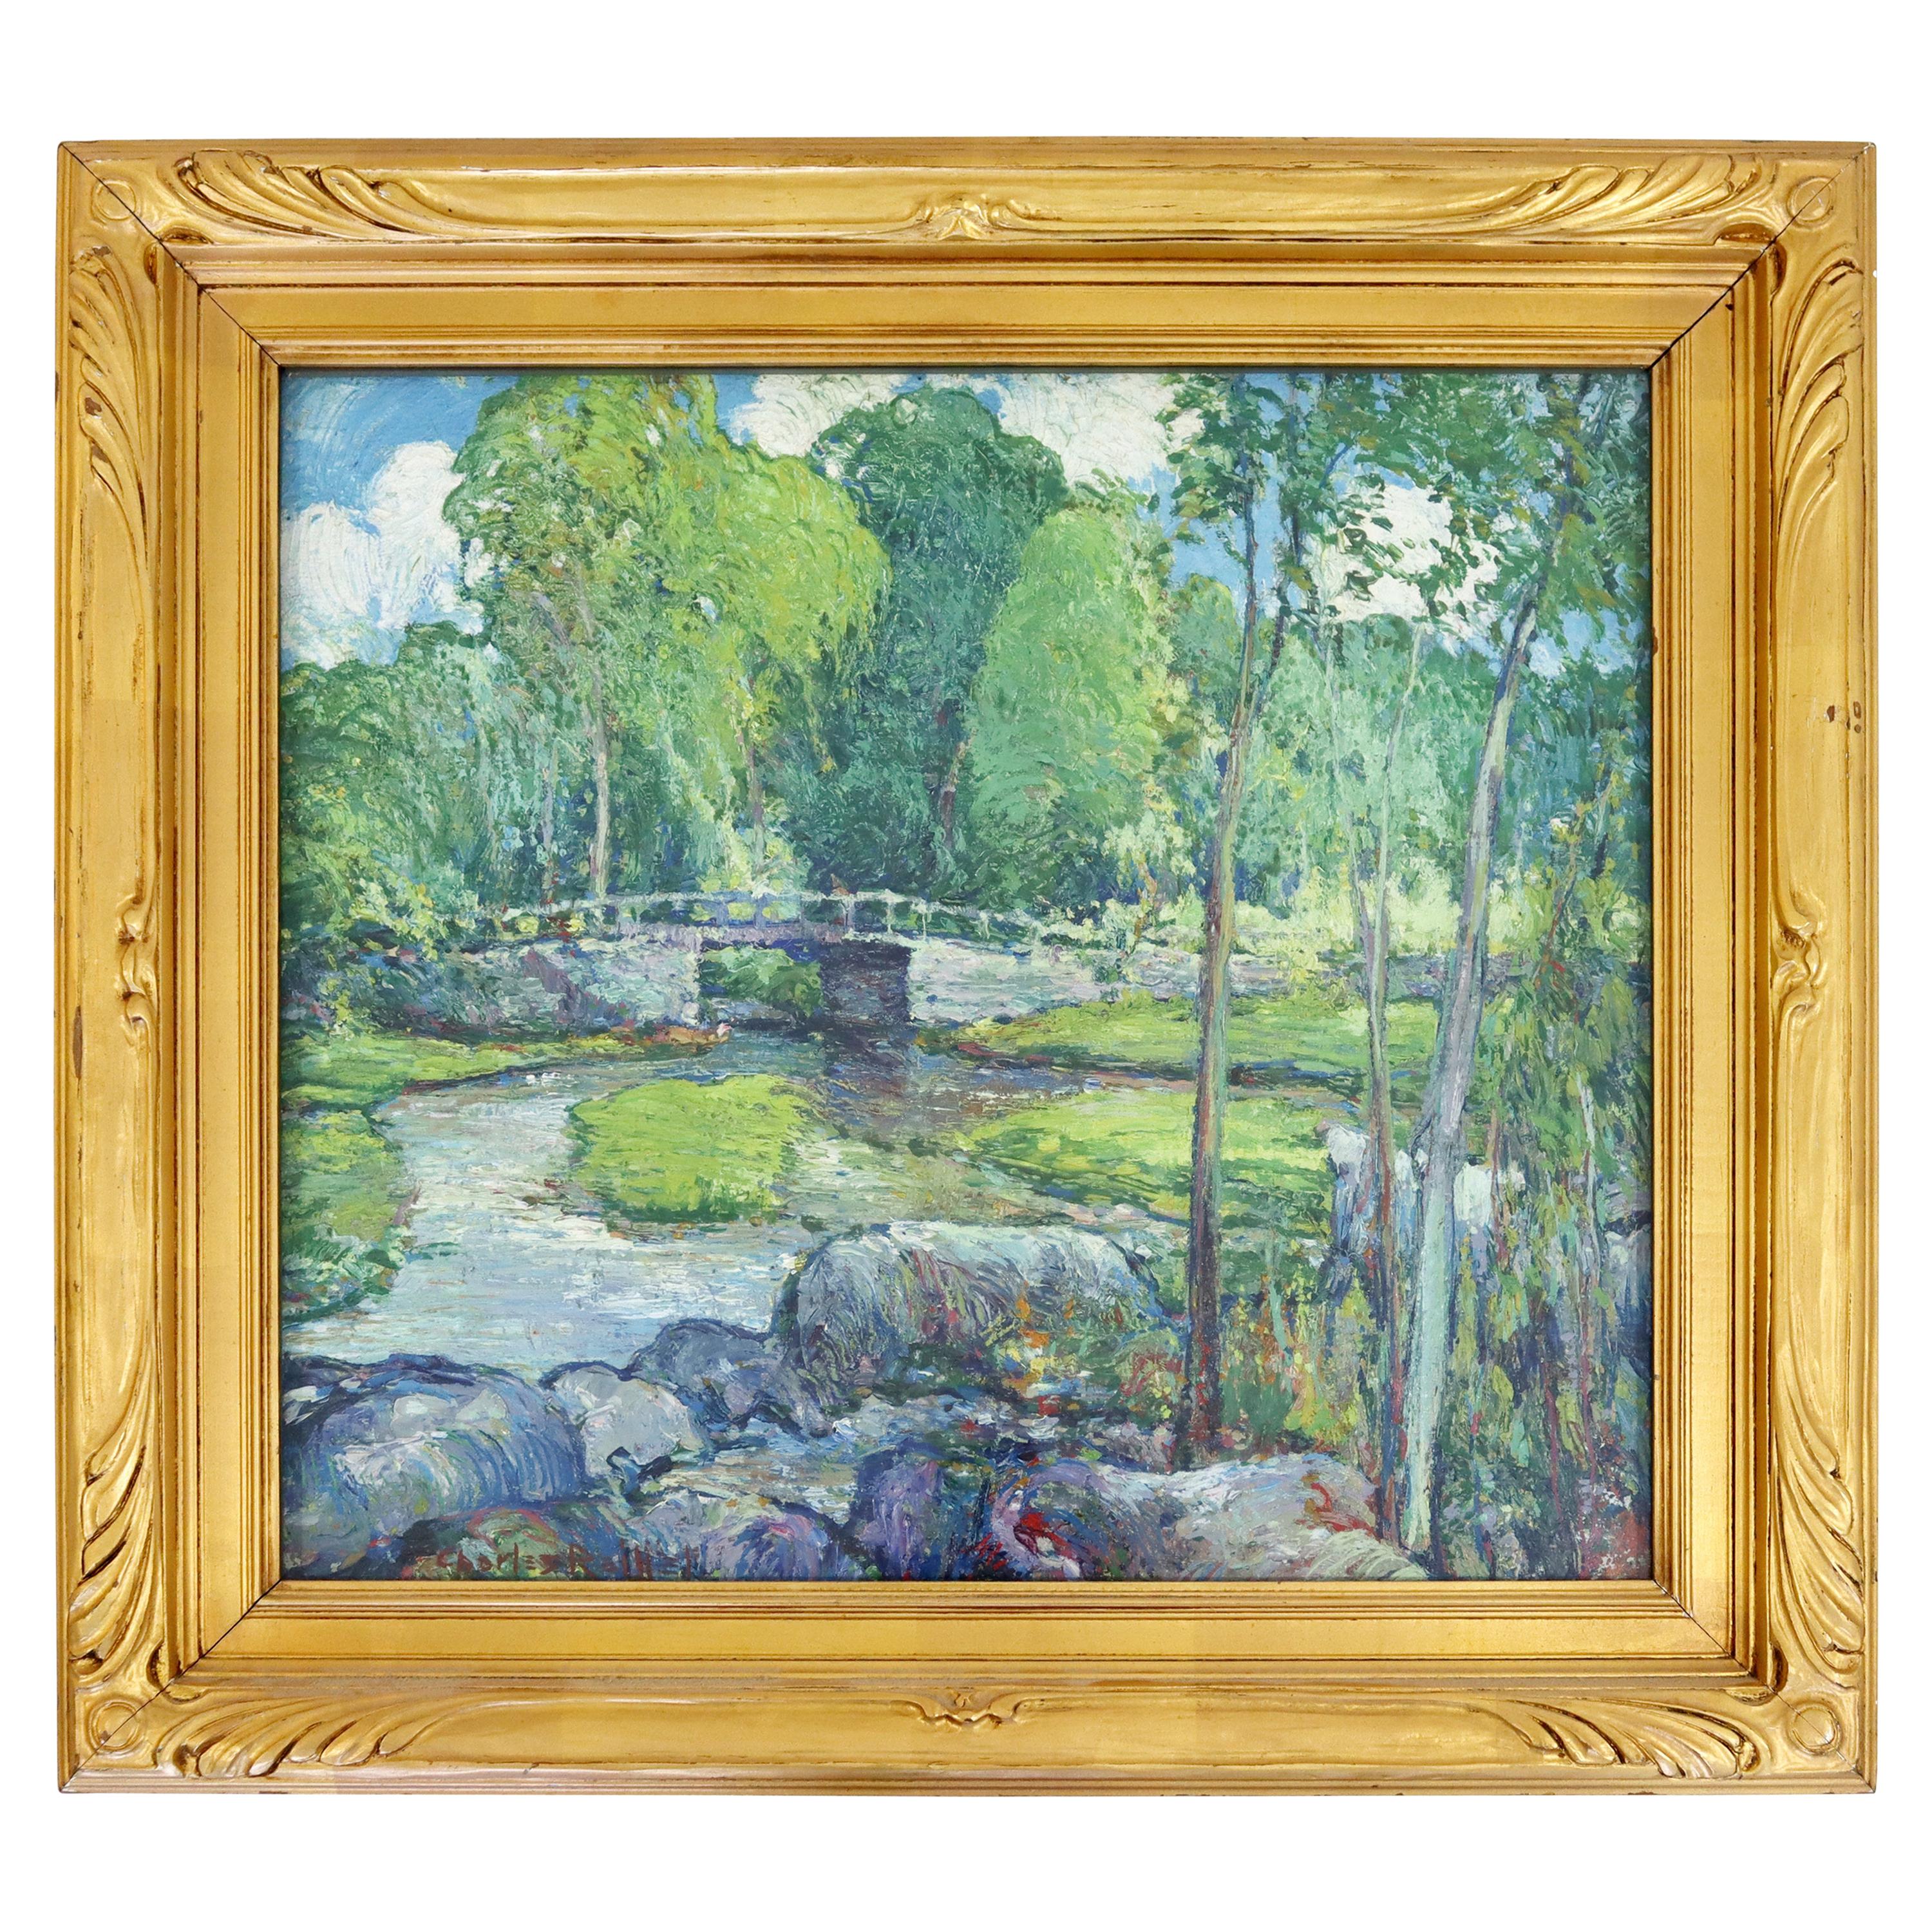 Antique Post Impressionist Framed Oil Board Painting Signed Charles Reiffel 1930